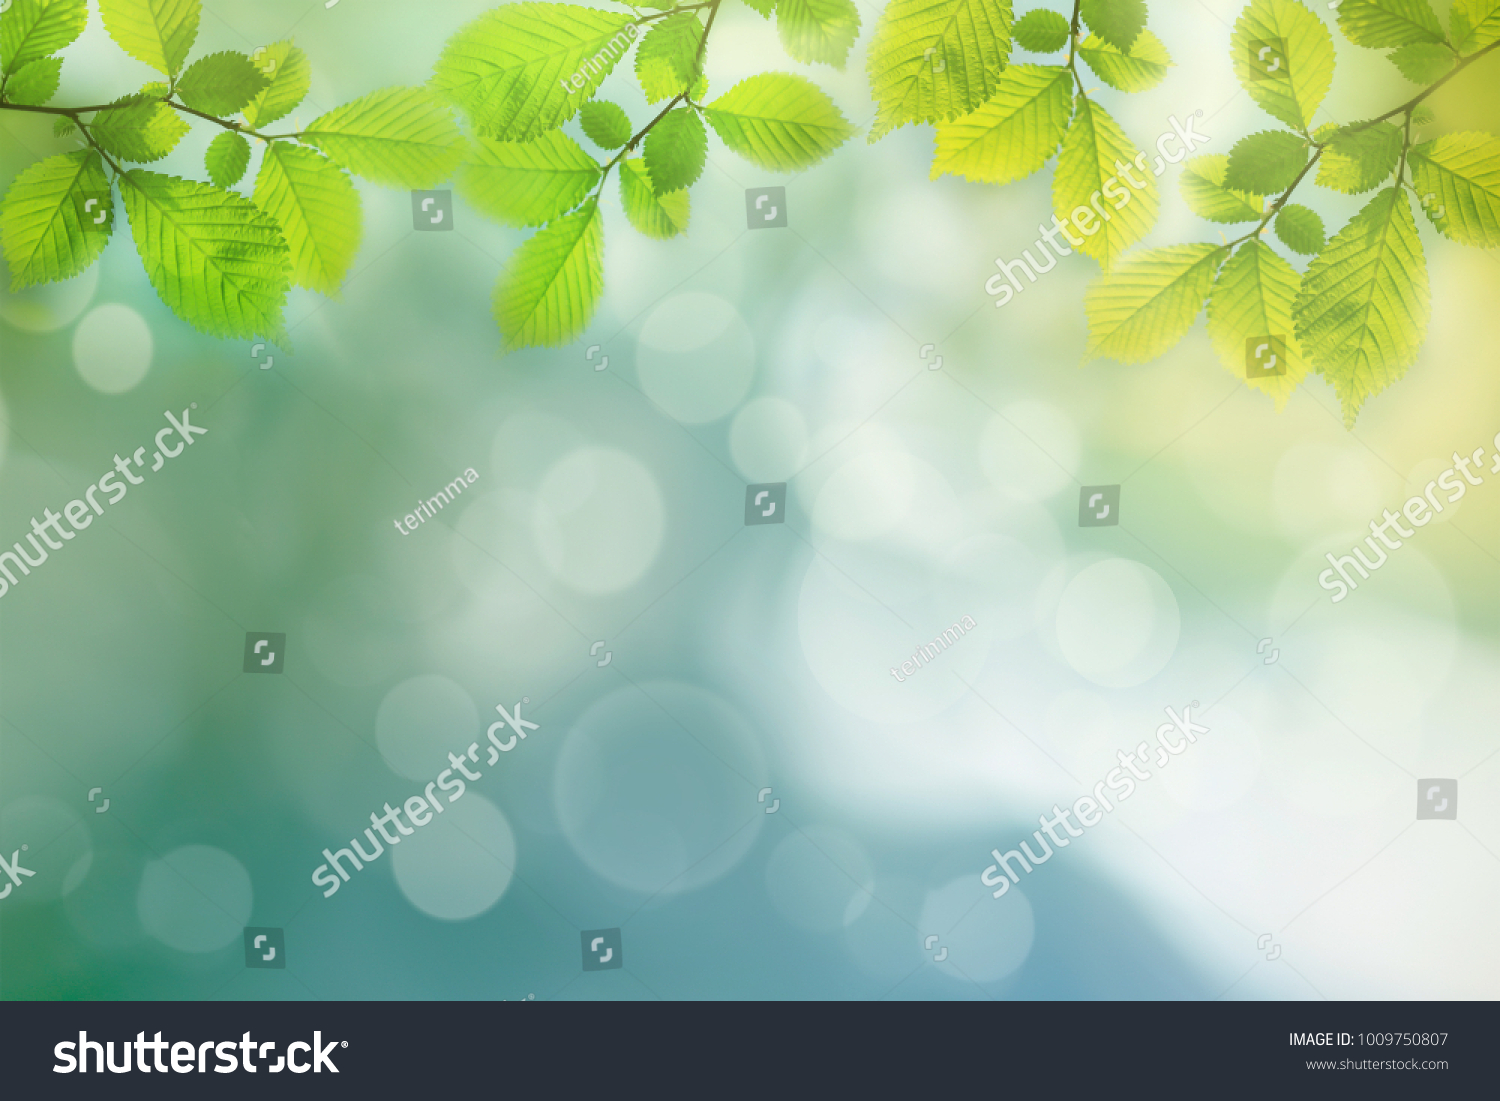 Spring background, green tree leaves on blurred background #1009750807